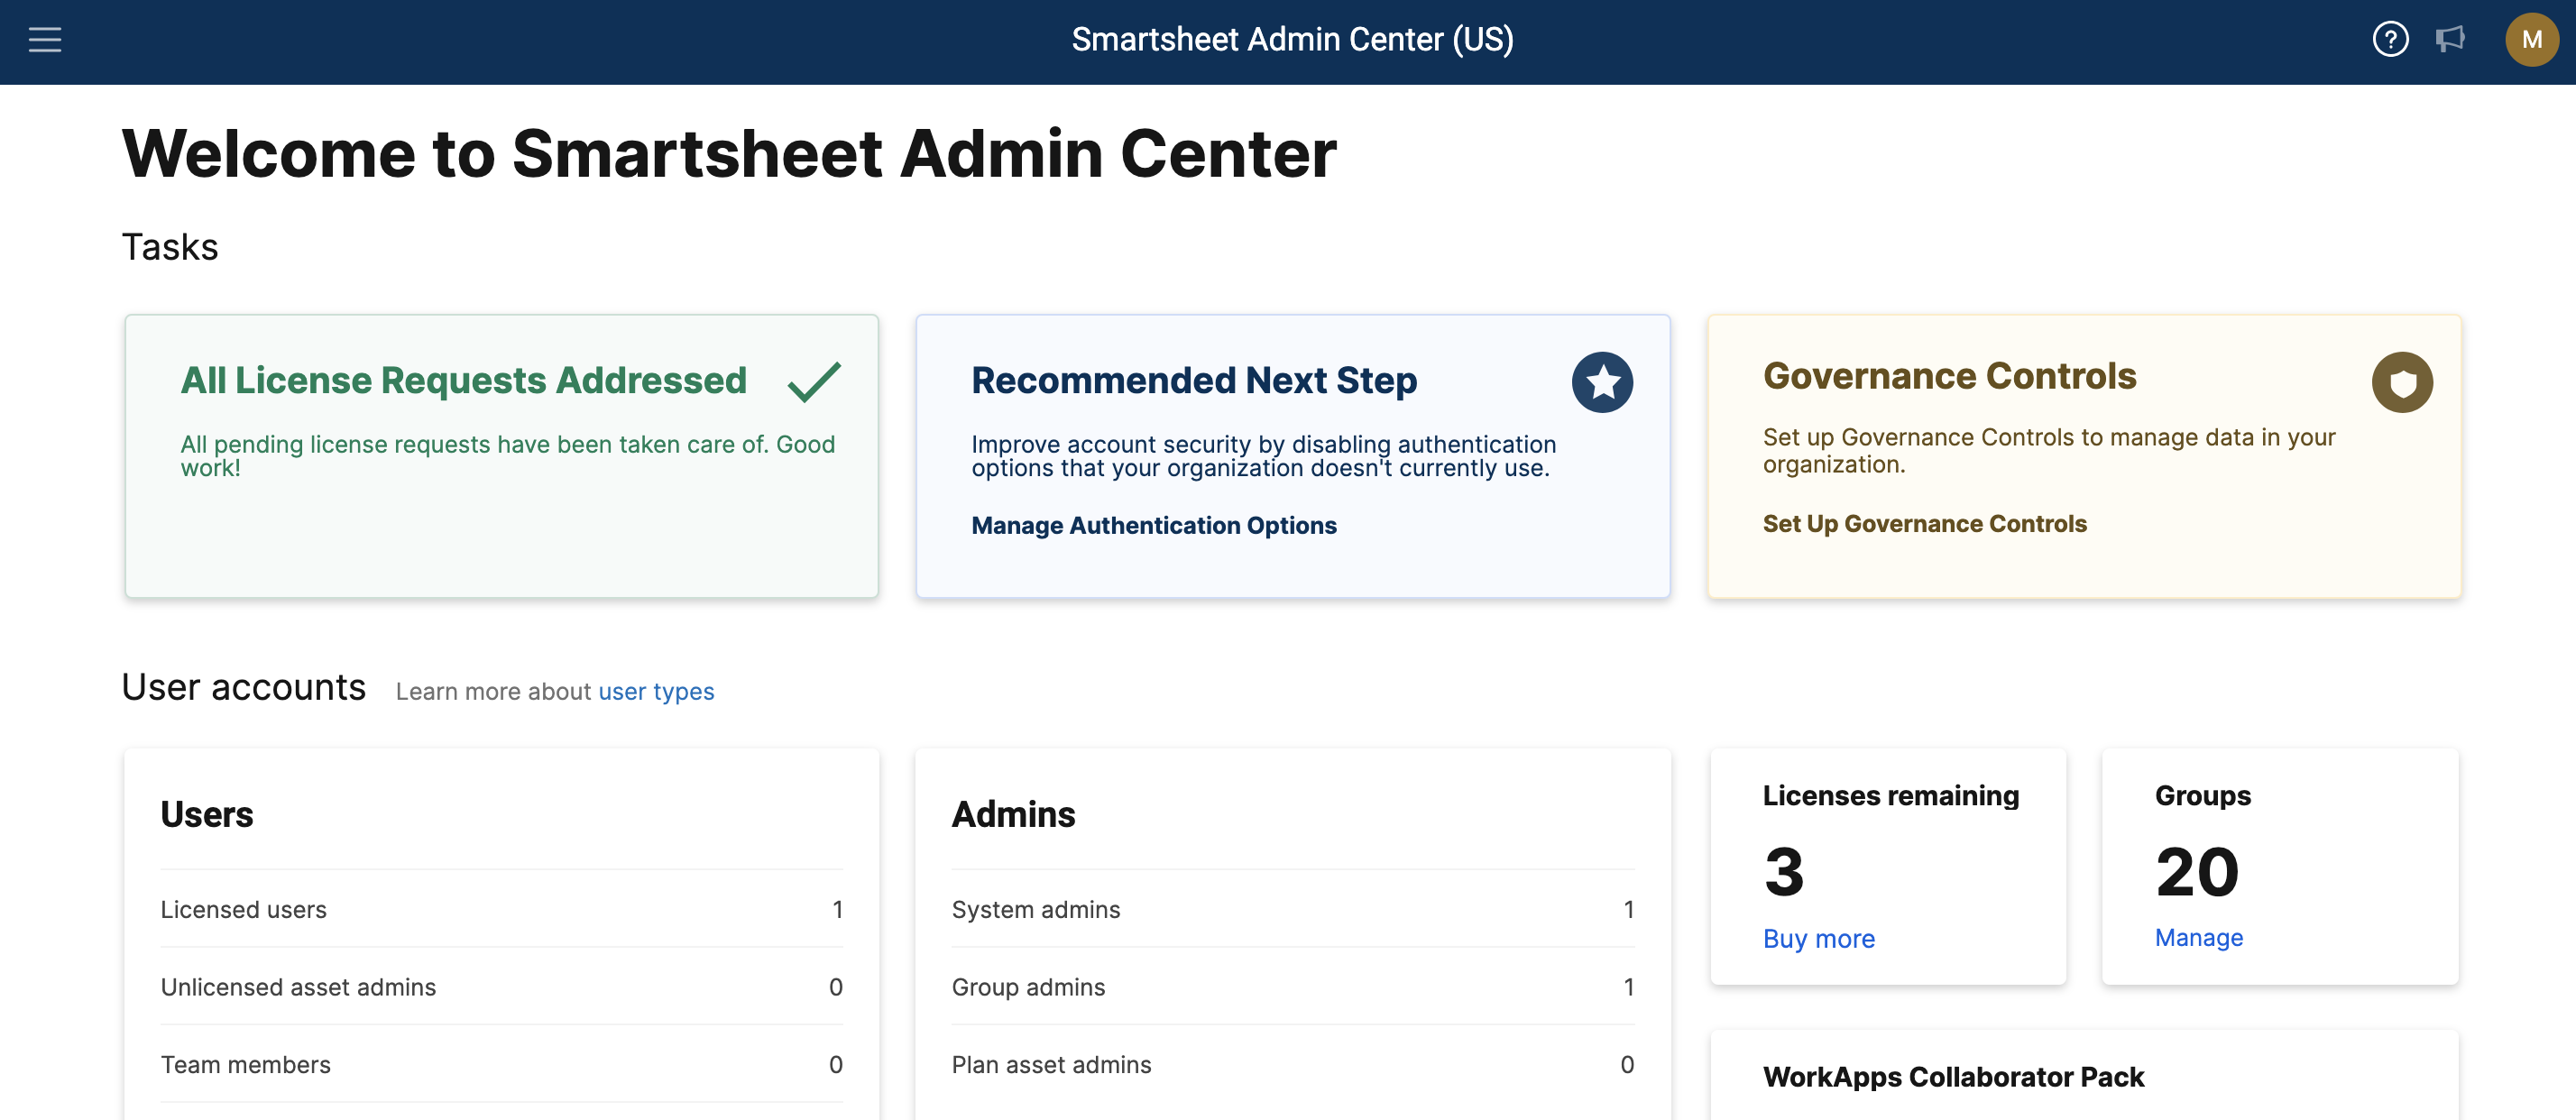 Admin Center home page with Tasks, User accounts, Plan Insights, and more.